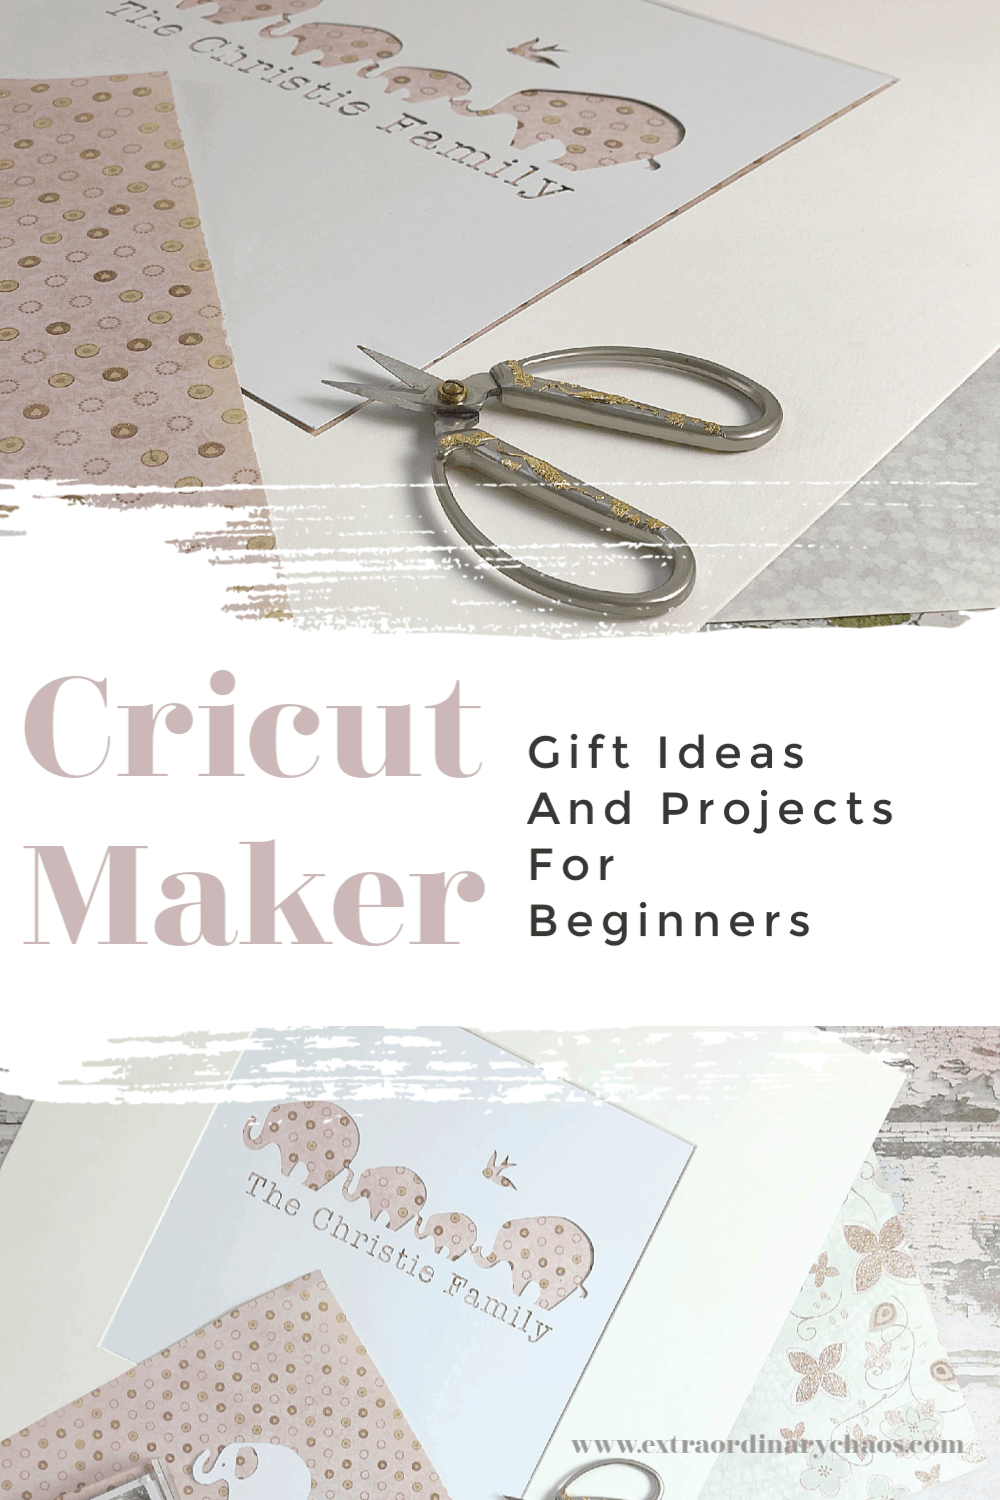 Cricut Maker Gift Ideas and Projects for beginners #cricutforbeginners #cricutgiftideas #cricutpersonalisedgifts